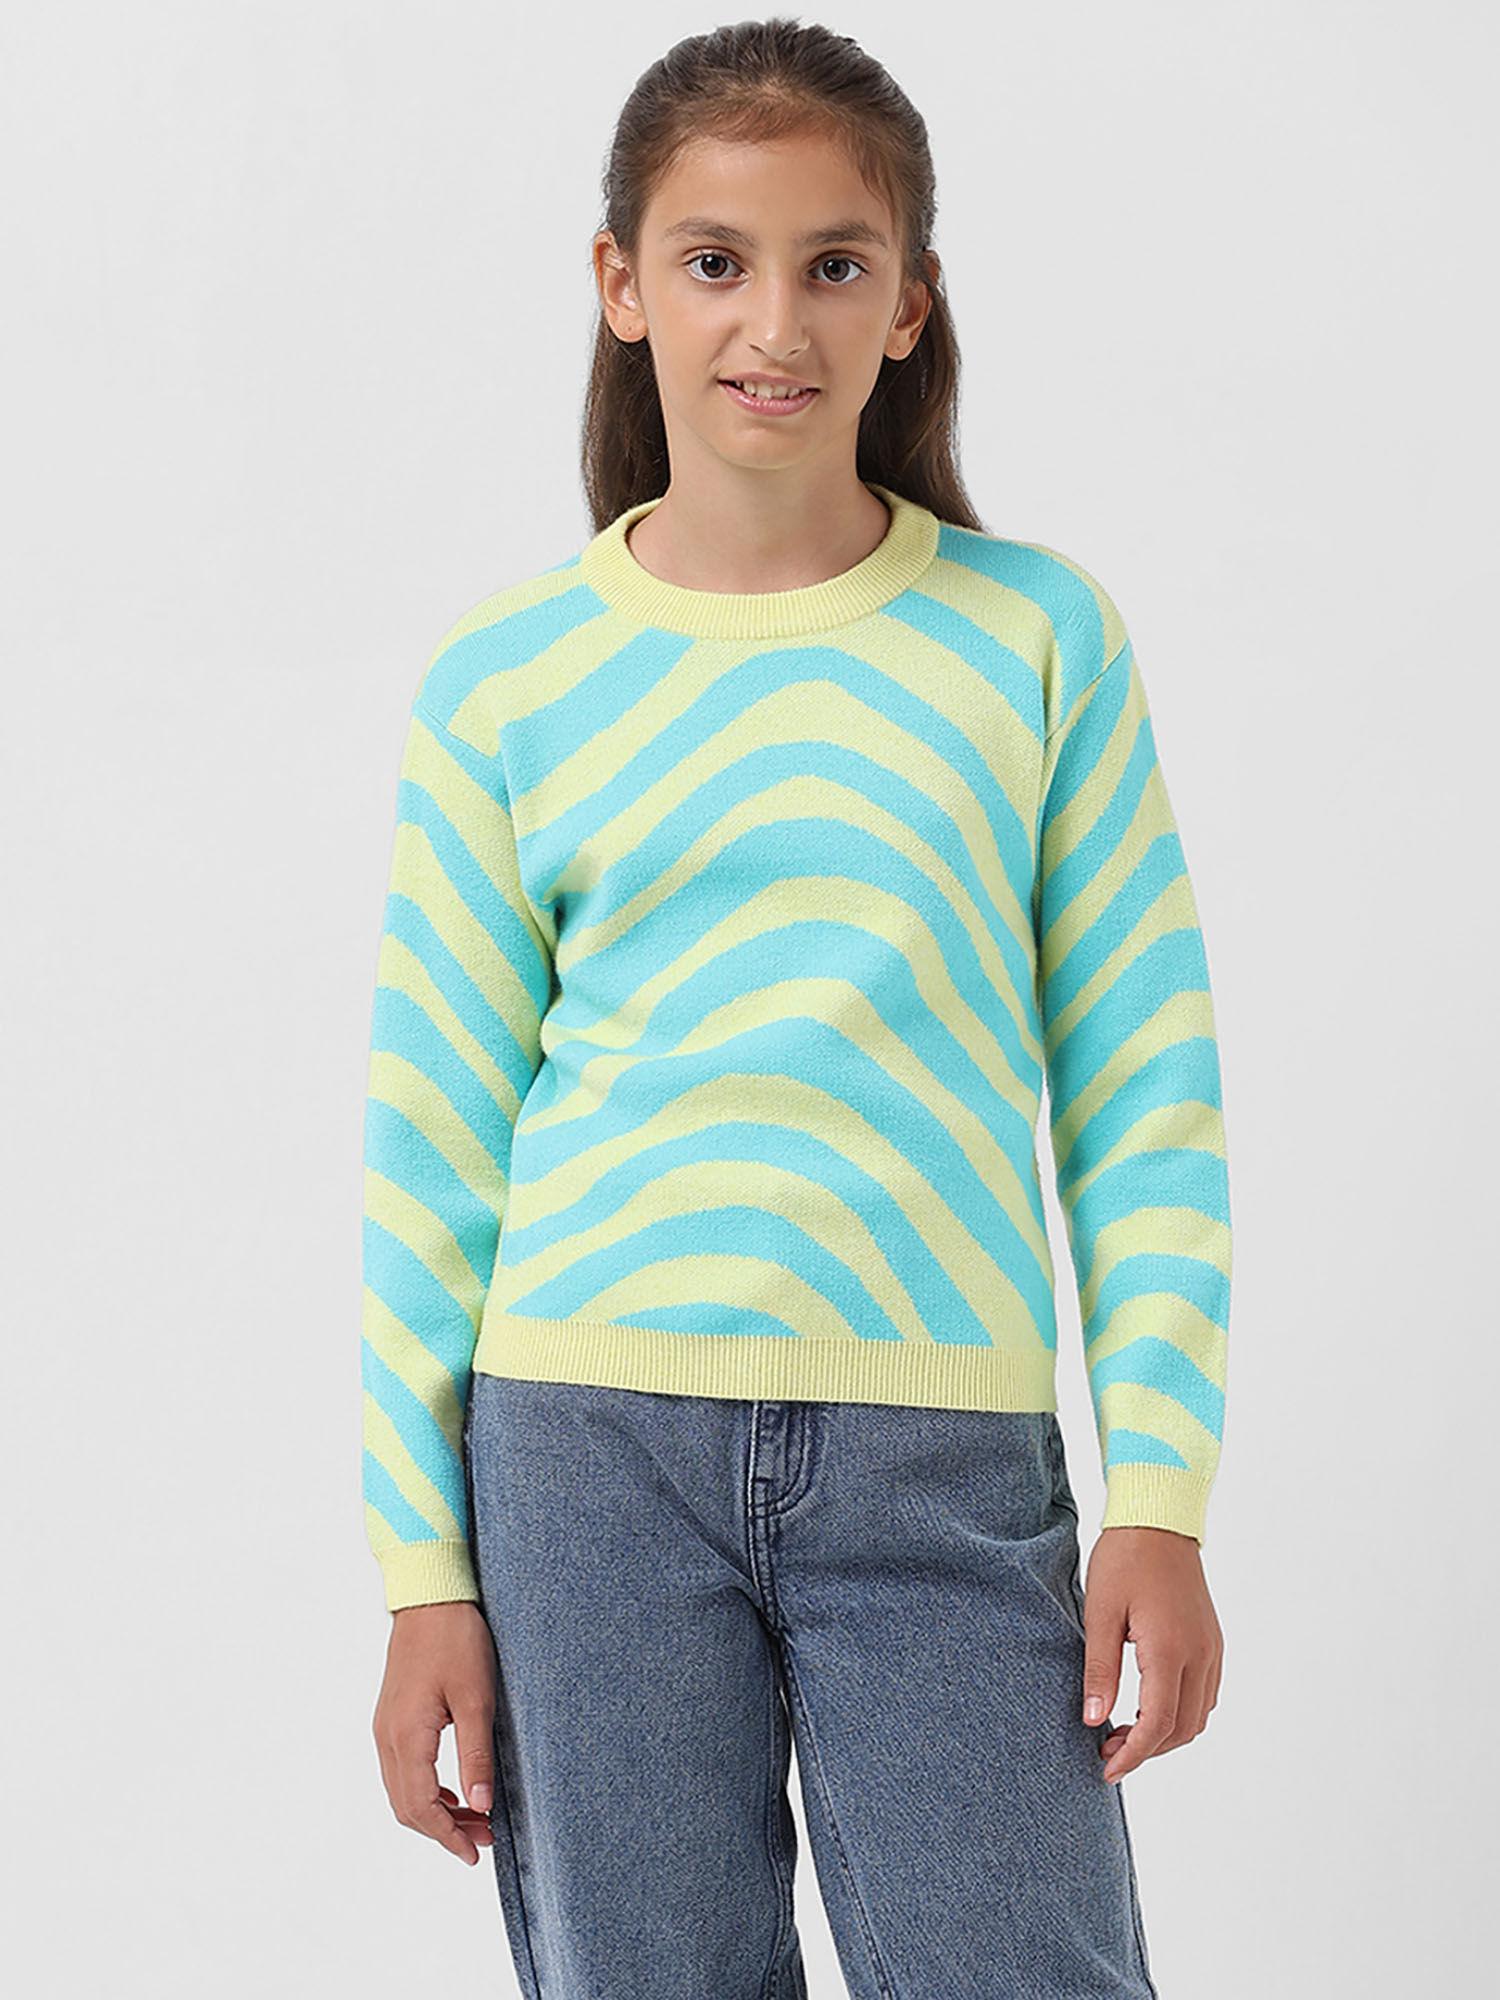 girls-abstract-print-blue-sweater